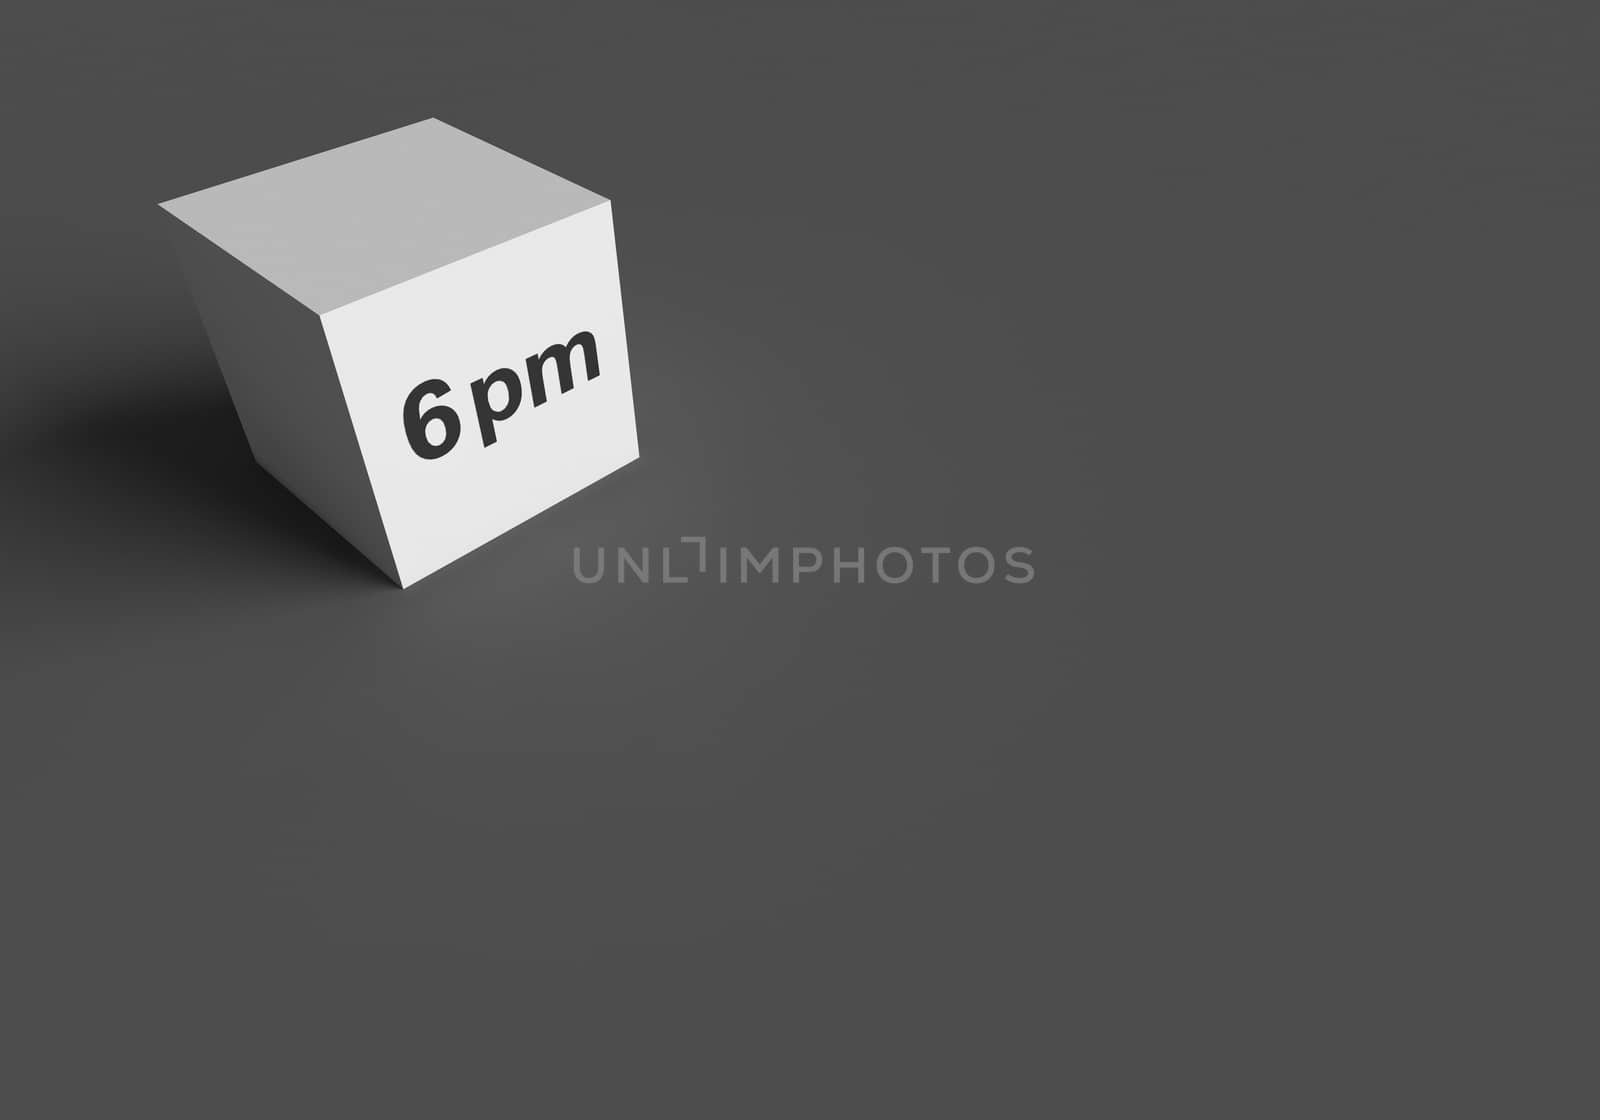 3D RENDERING WORDS 6 pm ON WHITE CUBE by PrettyTG